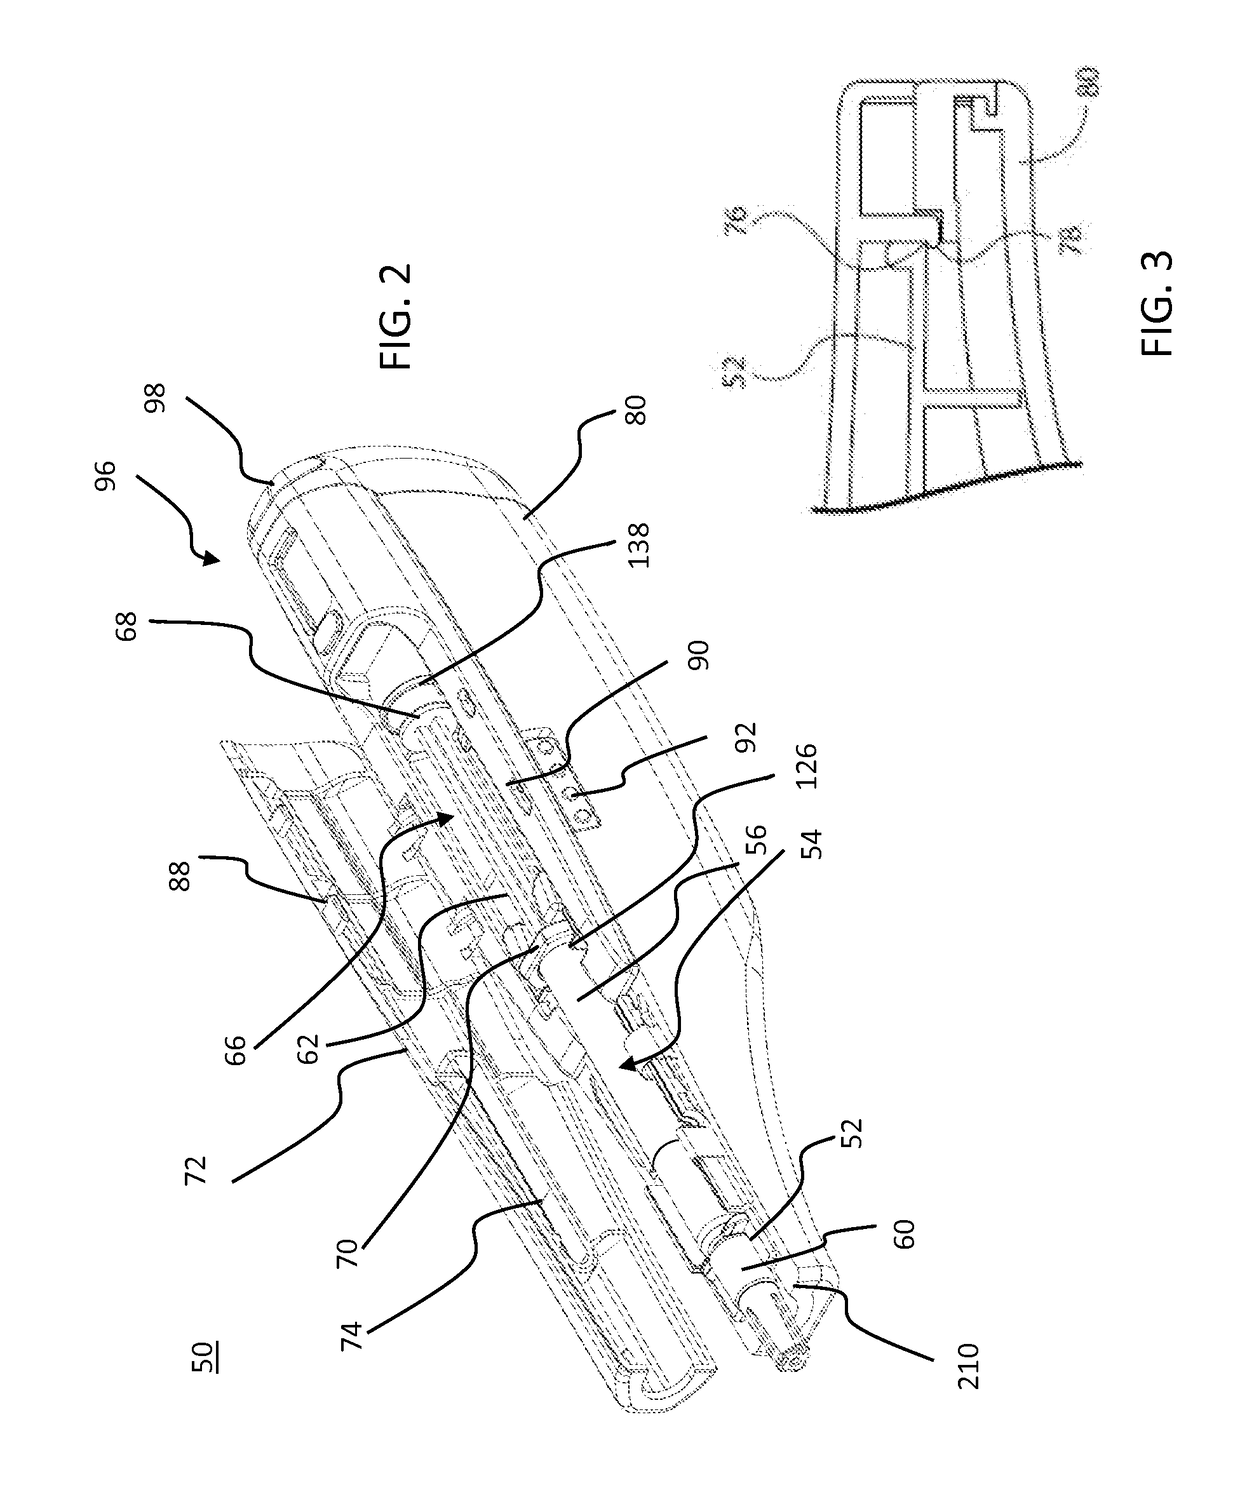 Skin Sensors and Automatic Injectors for Injectable Syringes Having Skin Sensors